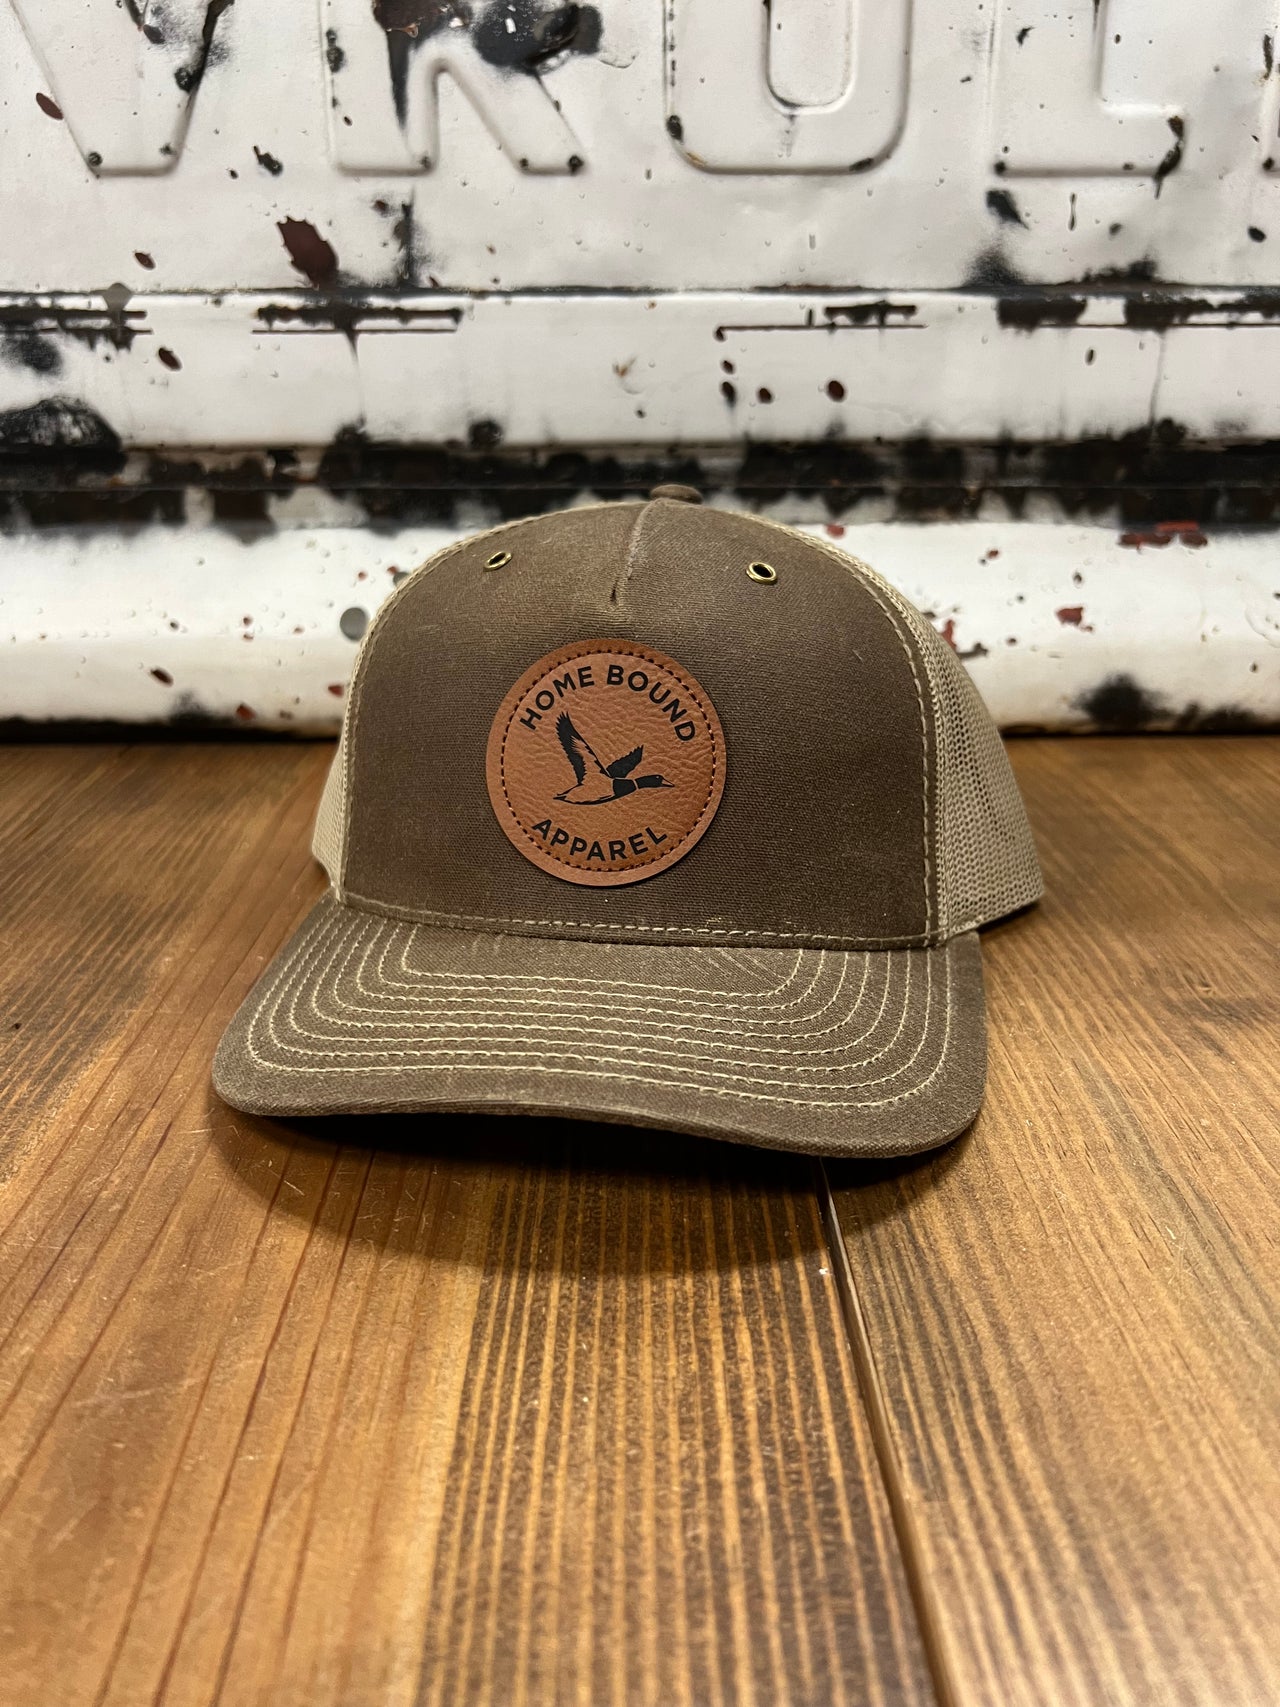 Home Bound Flying Duck Leather Patch Cap - Waxed Buck/Khaki